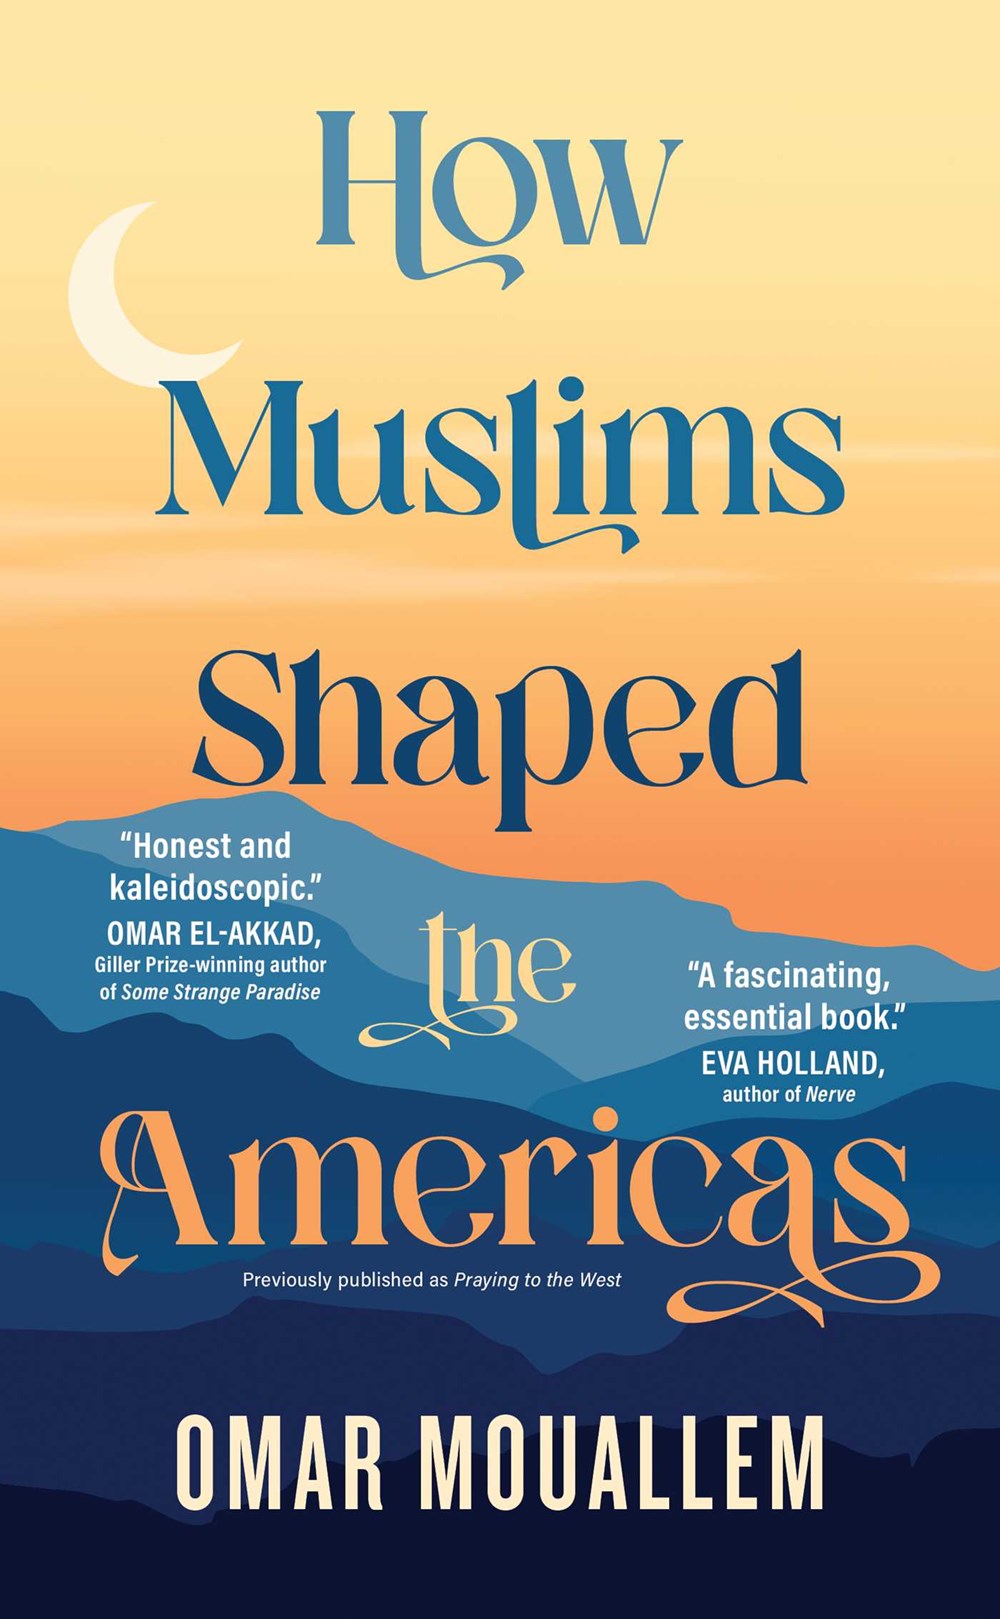 PRE-ORDER: How Muslims Shaped the Americas